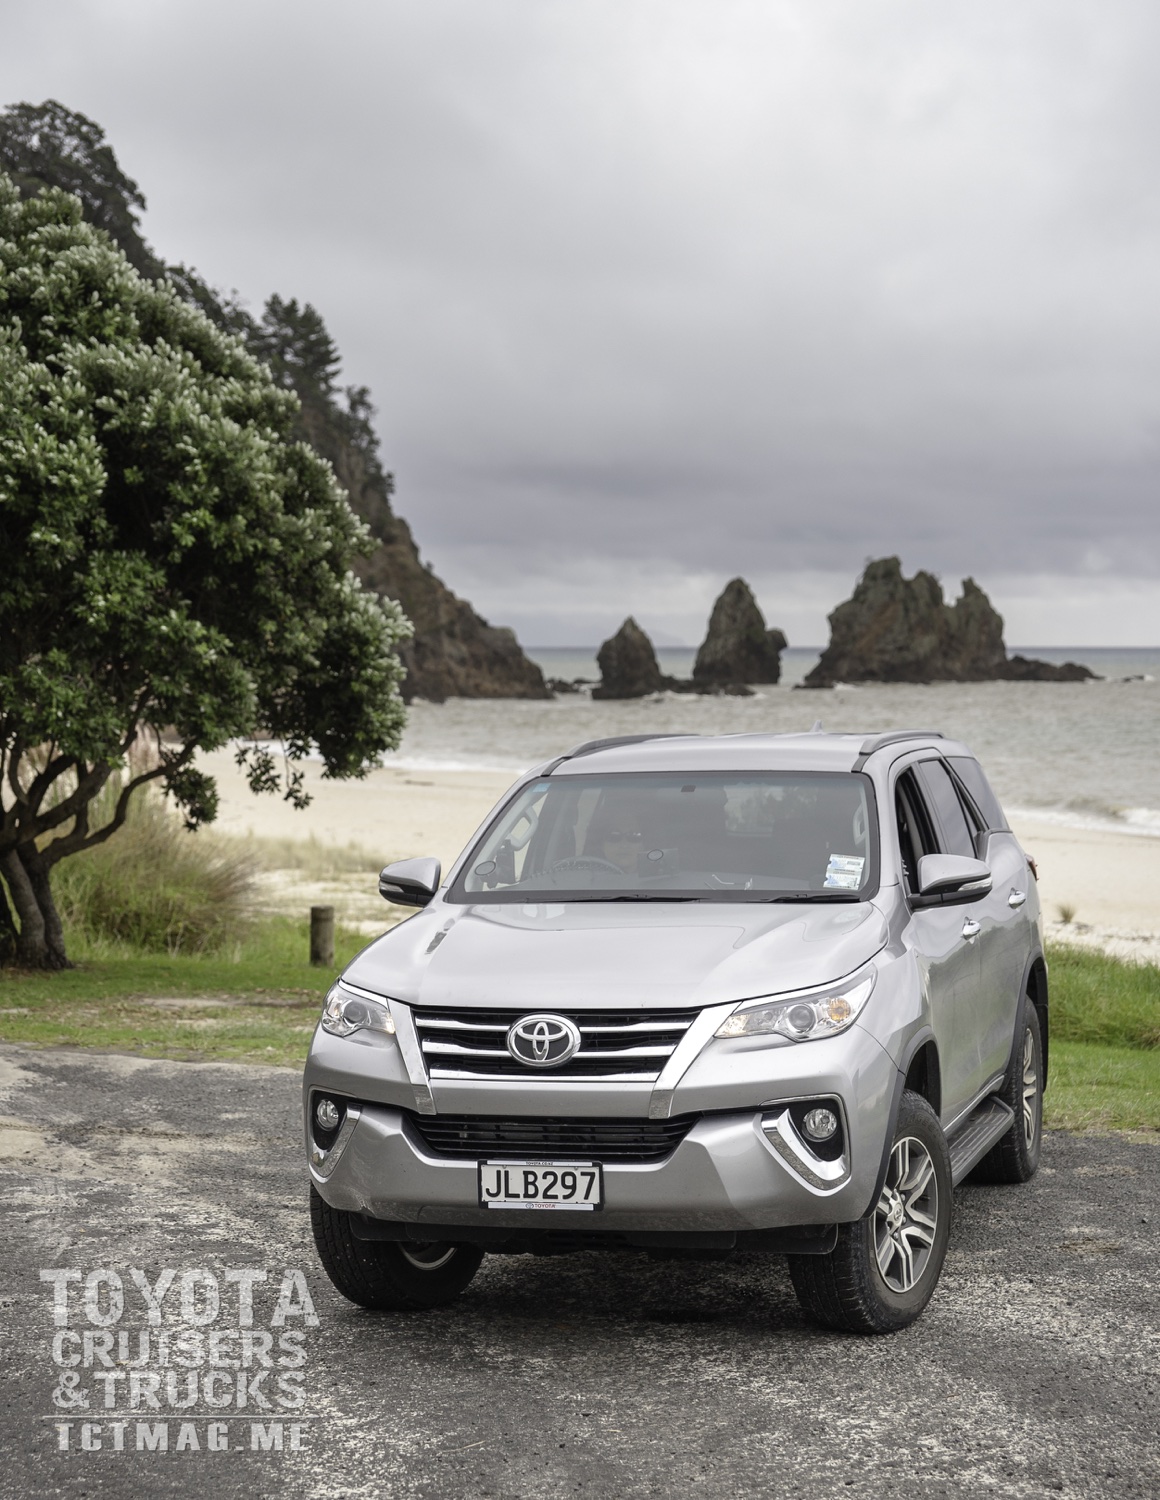 Expedition Portal, Overland Journal, New Zealand, Car & Driver, AutoTrader, Trade Me